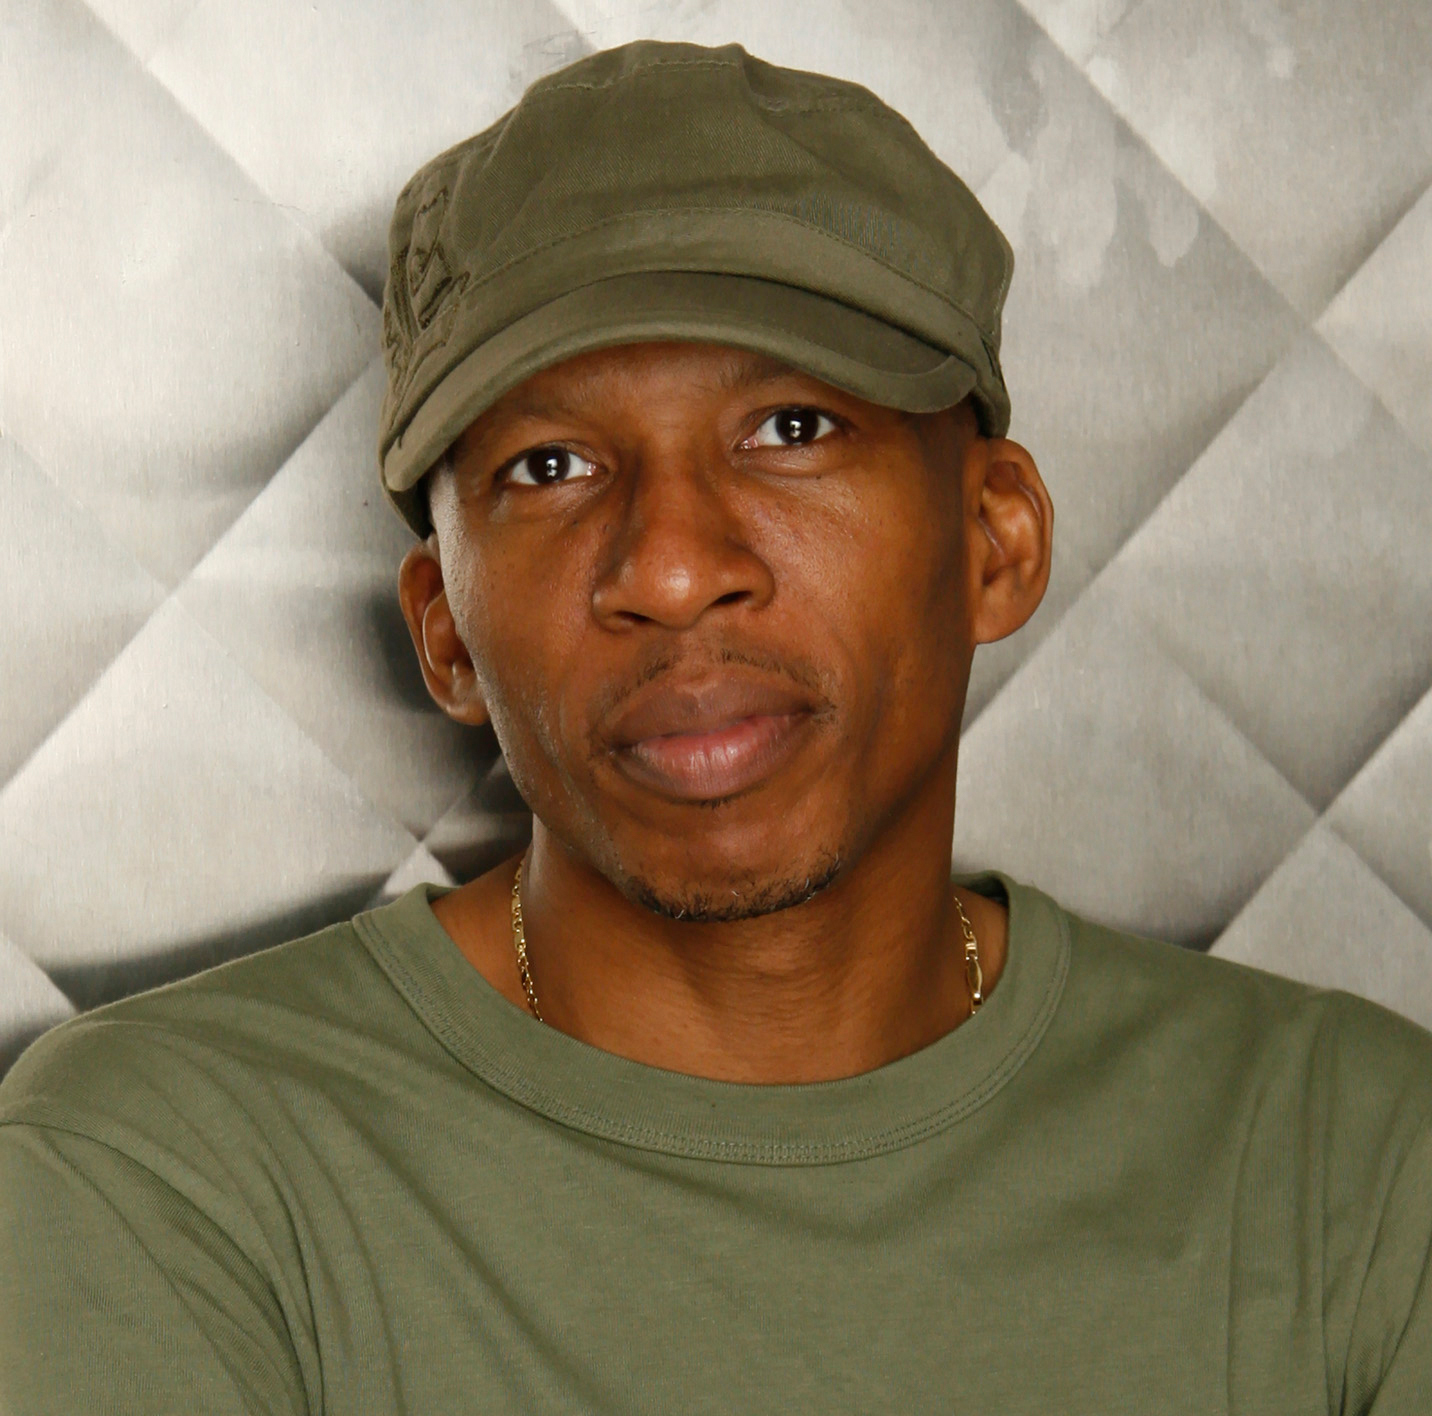 Interview: Hank Shocklee (The Bomb Squad)